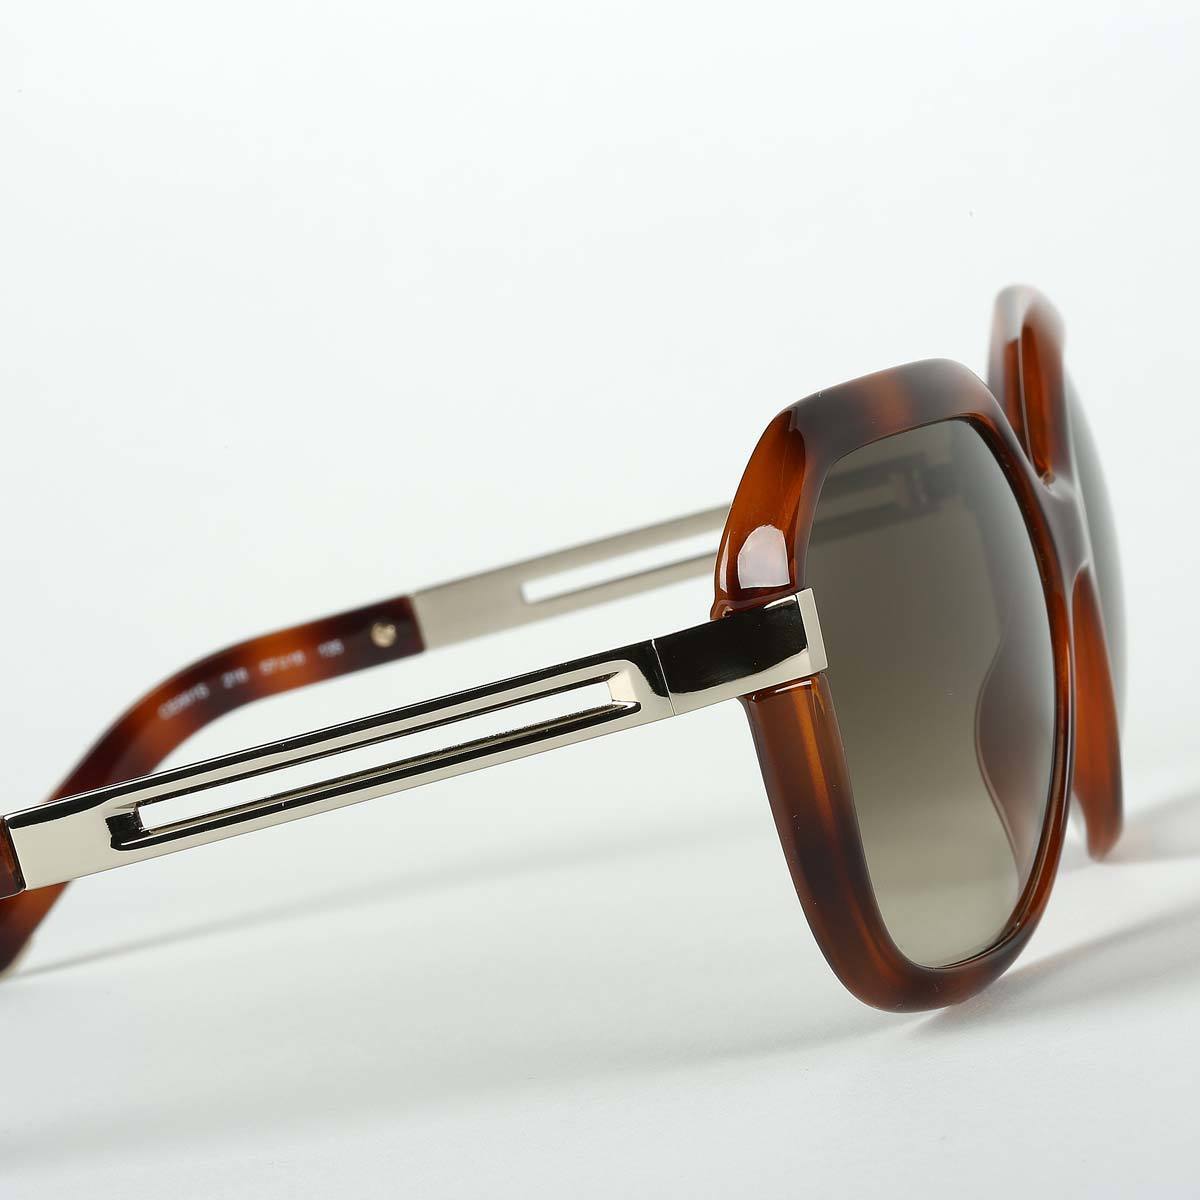 Chloe Tortoise Shell & Silver Sunglasses with Brown Lenses, CE 6612-218